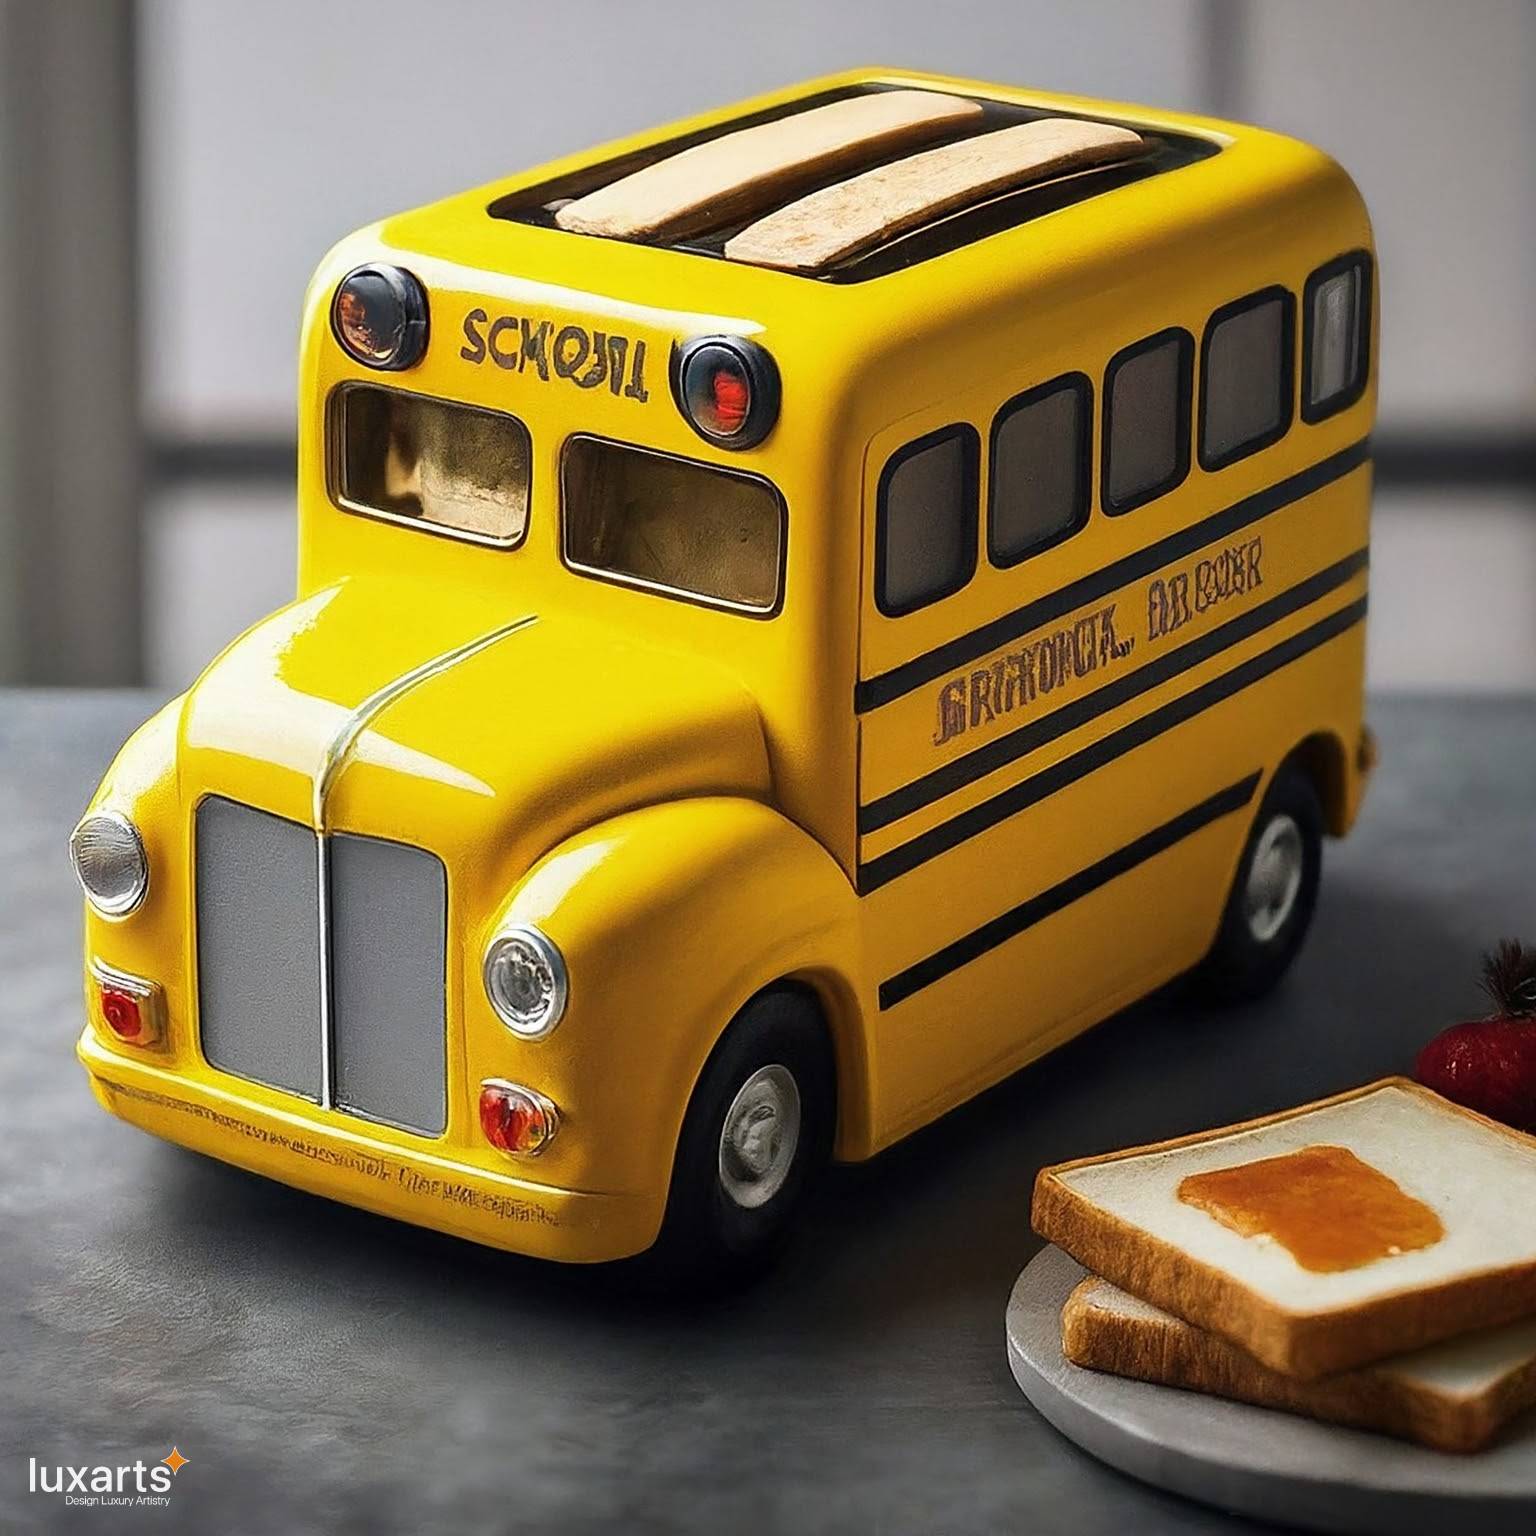 School Bus Shaped Toaster: Adding Fun to Breakfast Time luxarts school bus toaster 2